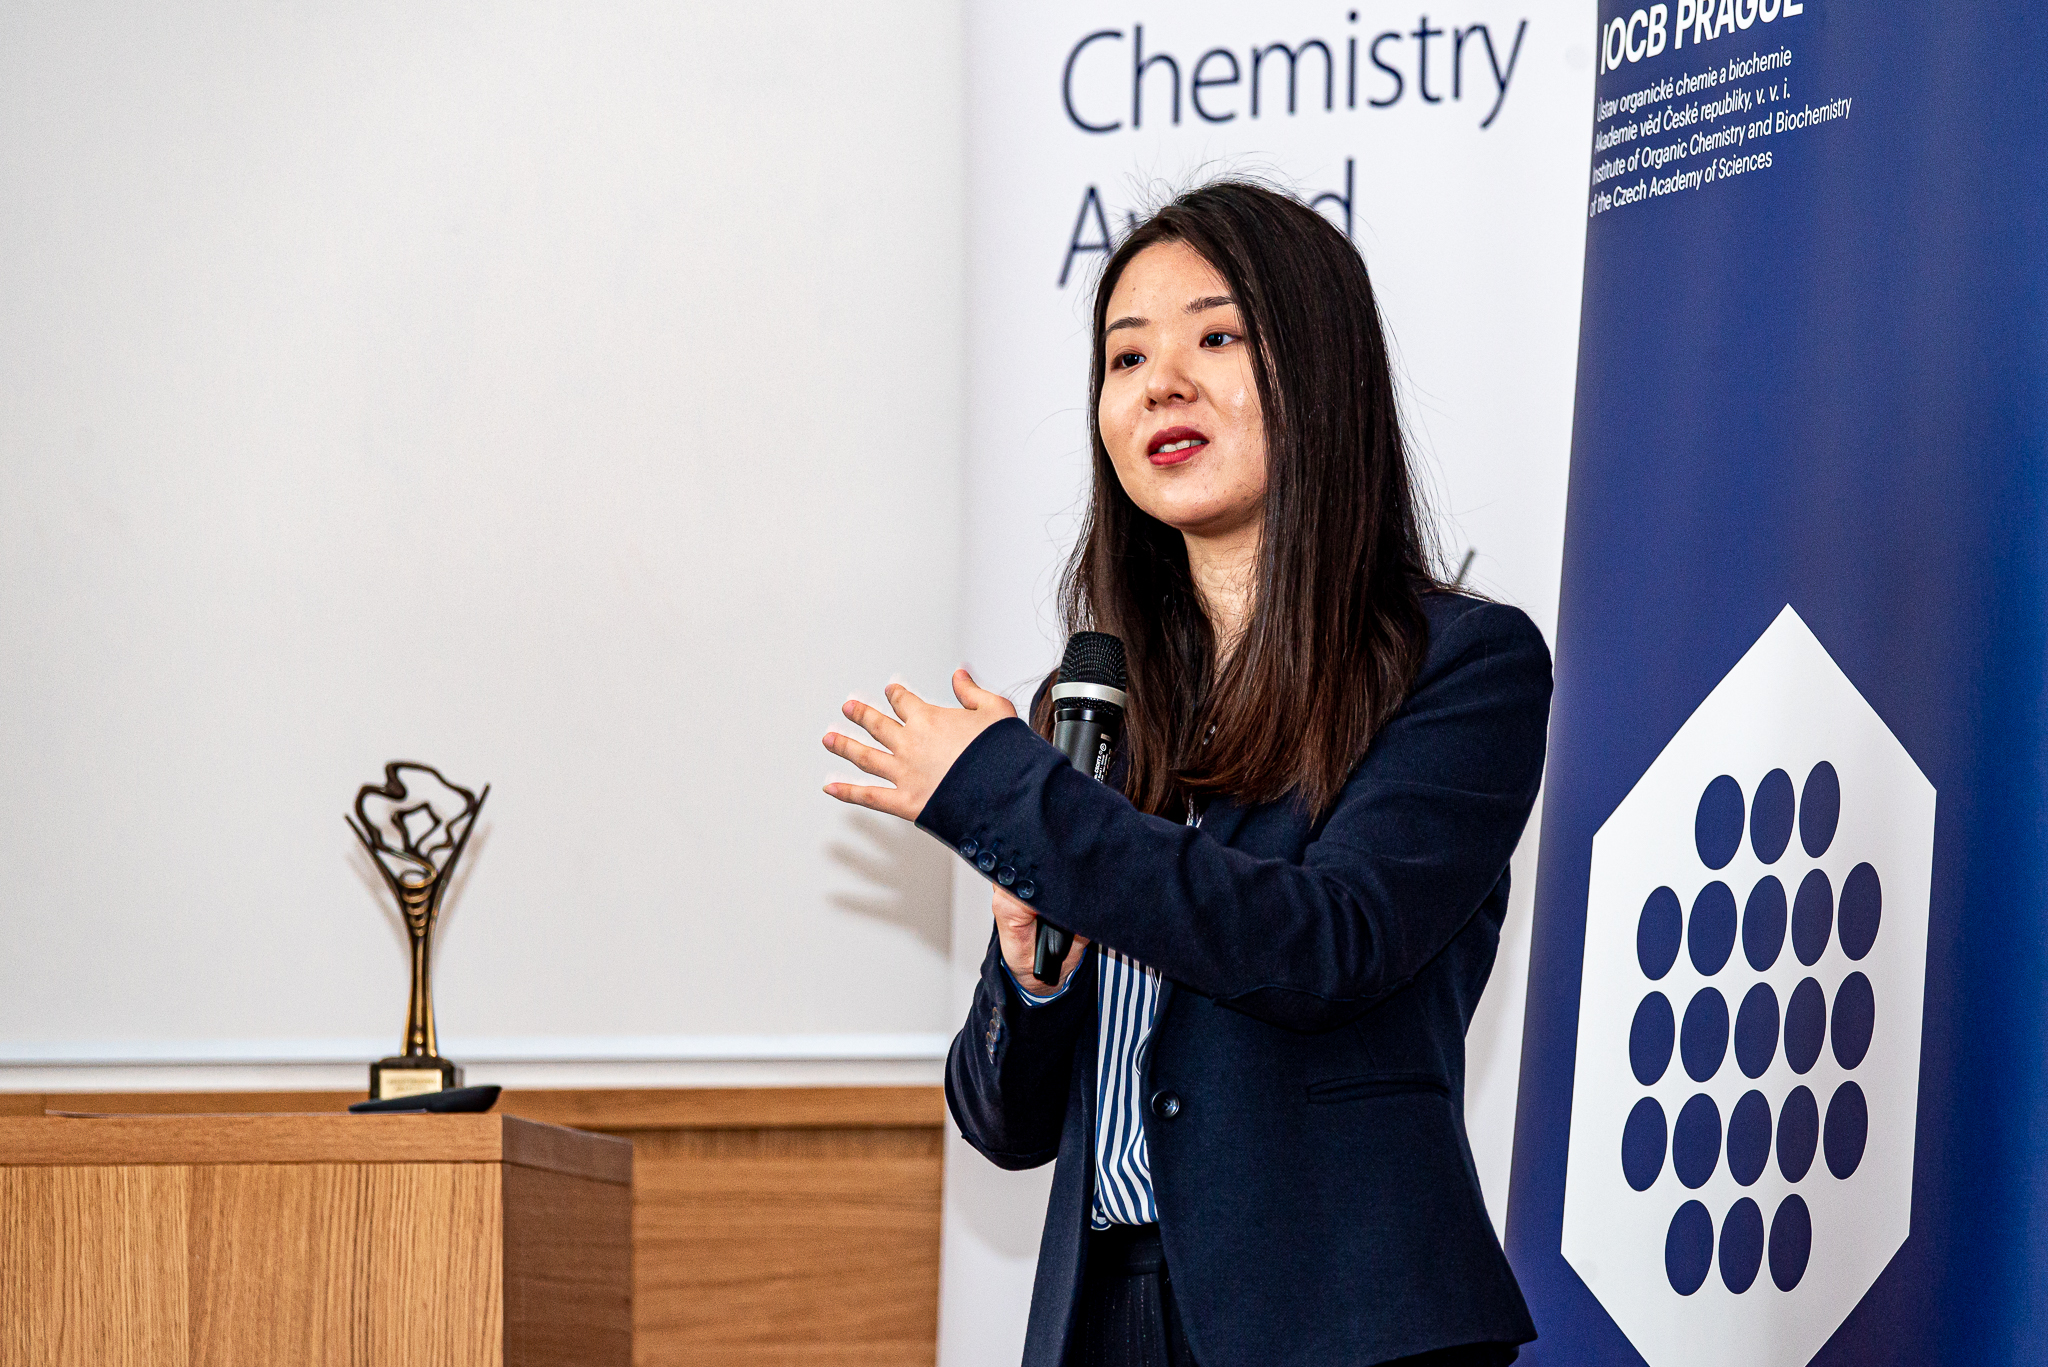 Dream Chemistry Award 2019 goes to Yujia Qing of University of Oxford